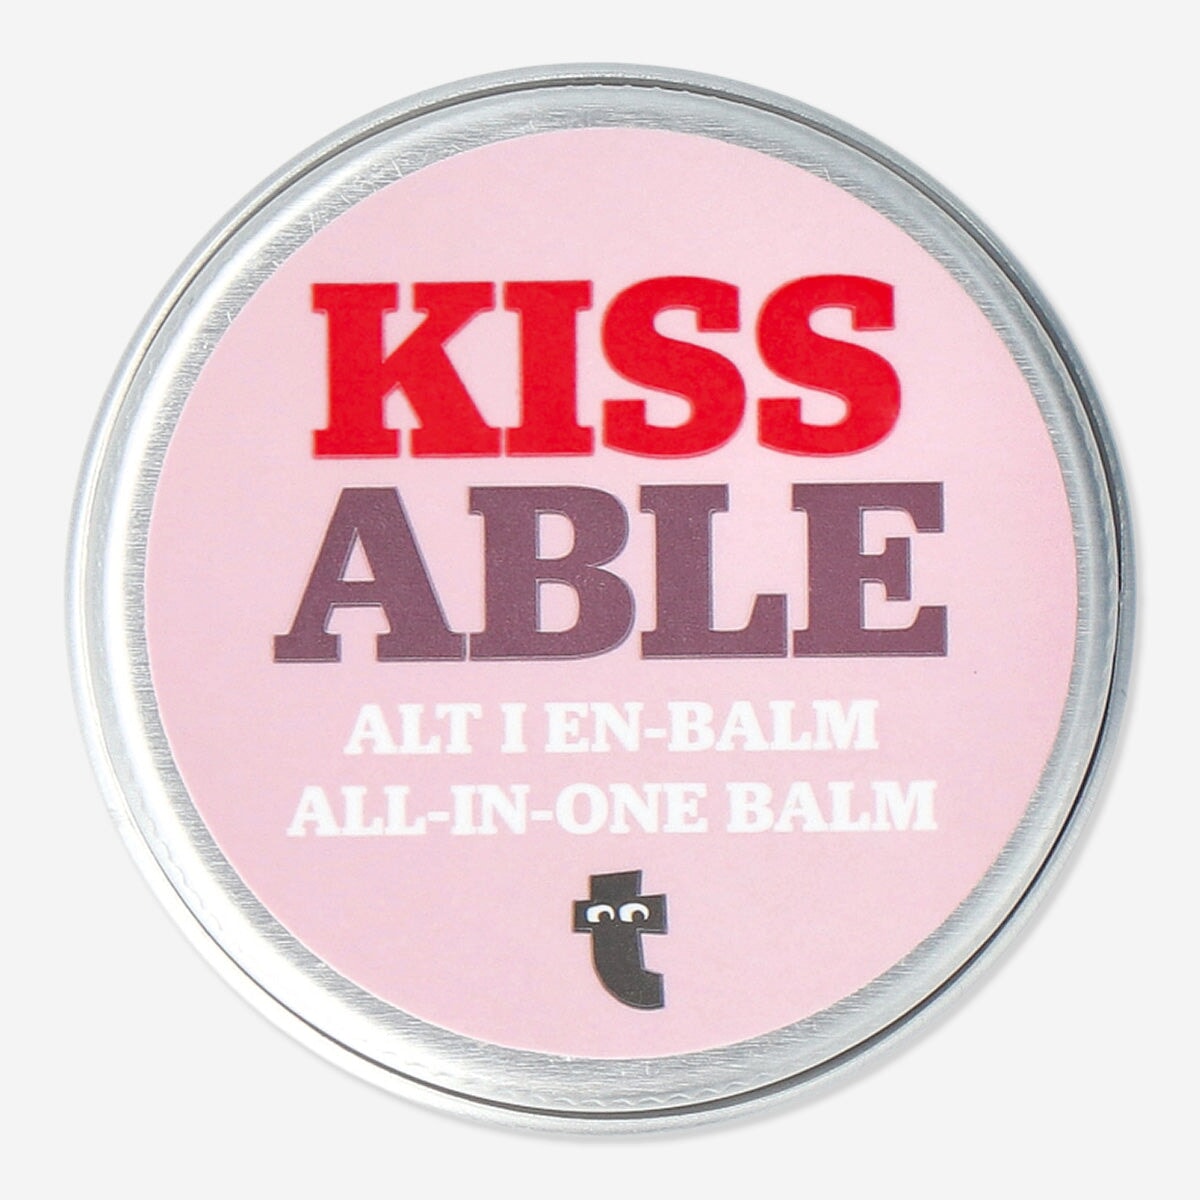 All-in-one balm. For hands and lips Personal care Flying Tiger Copenhagen 